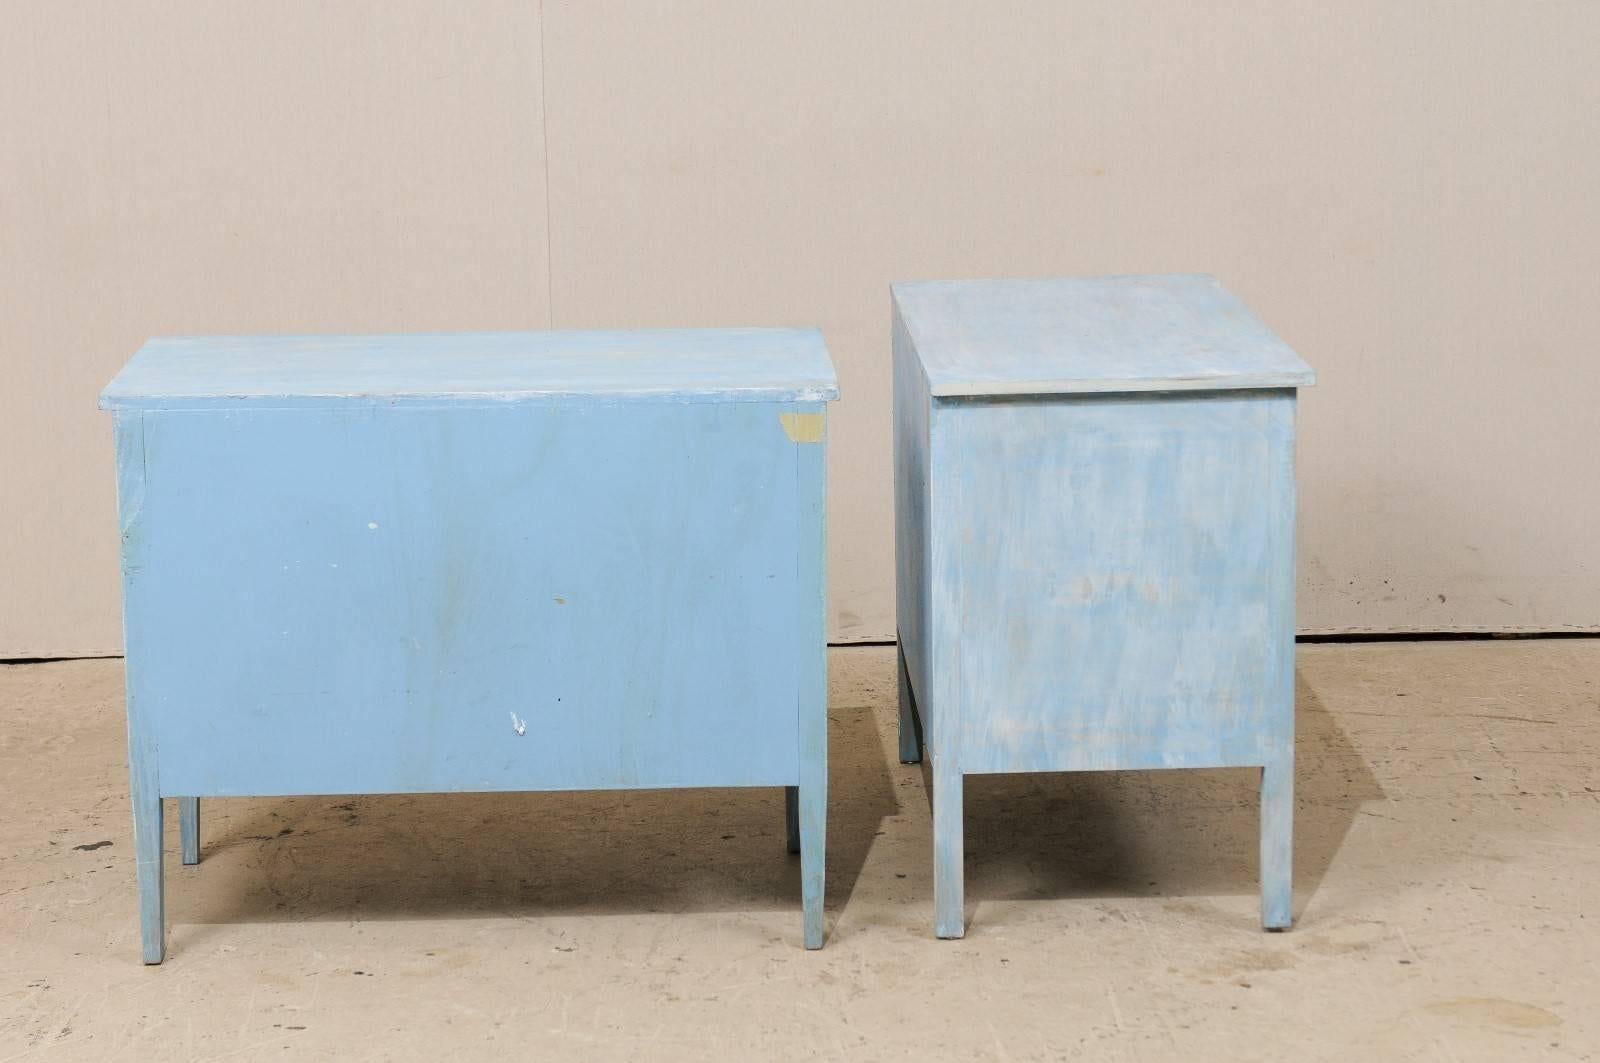 Pair of Painted Wood Two-Drawer Chests in Grey, Light Blue and White Color 1